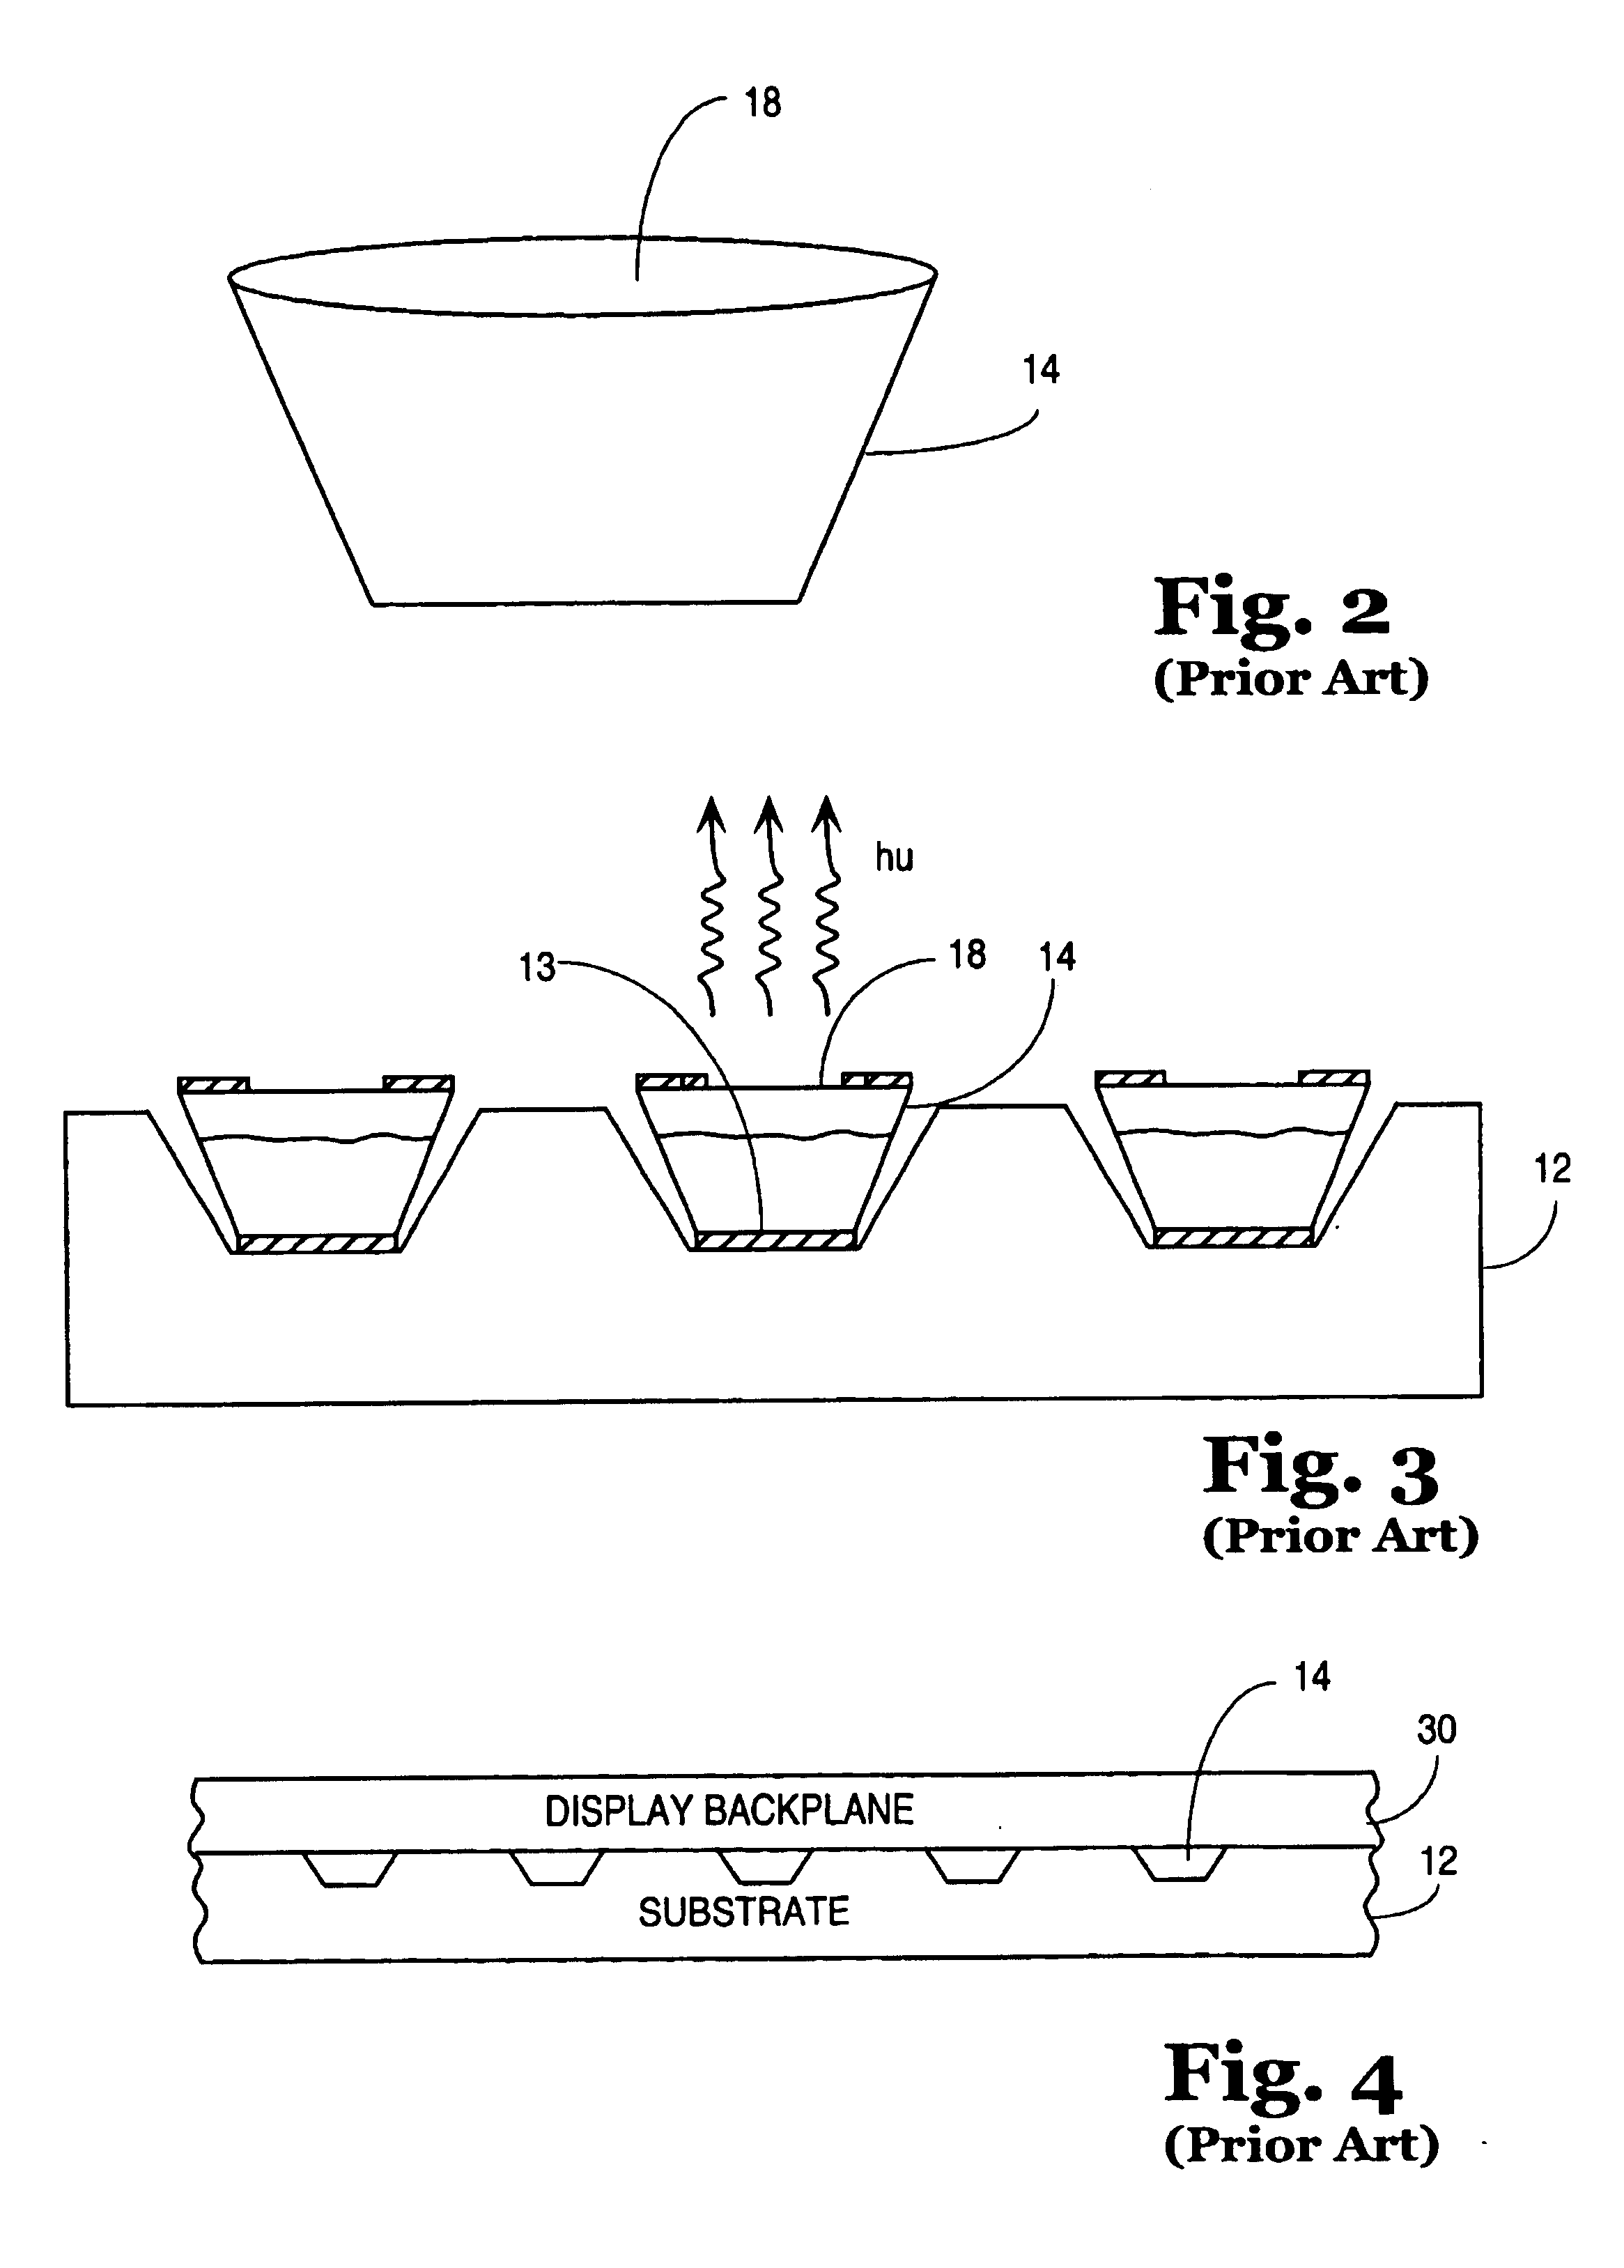 Apparatuses and methods for flexible displays